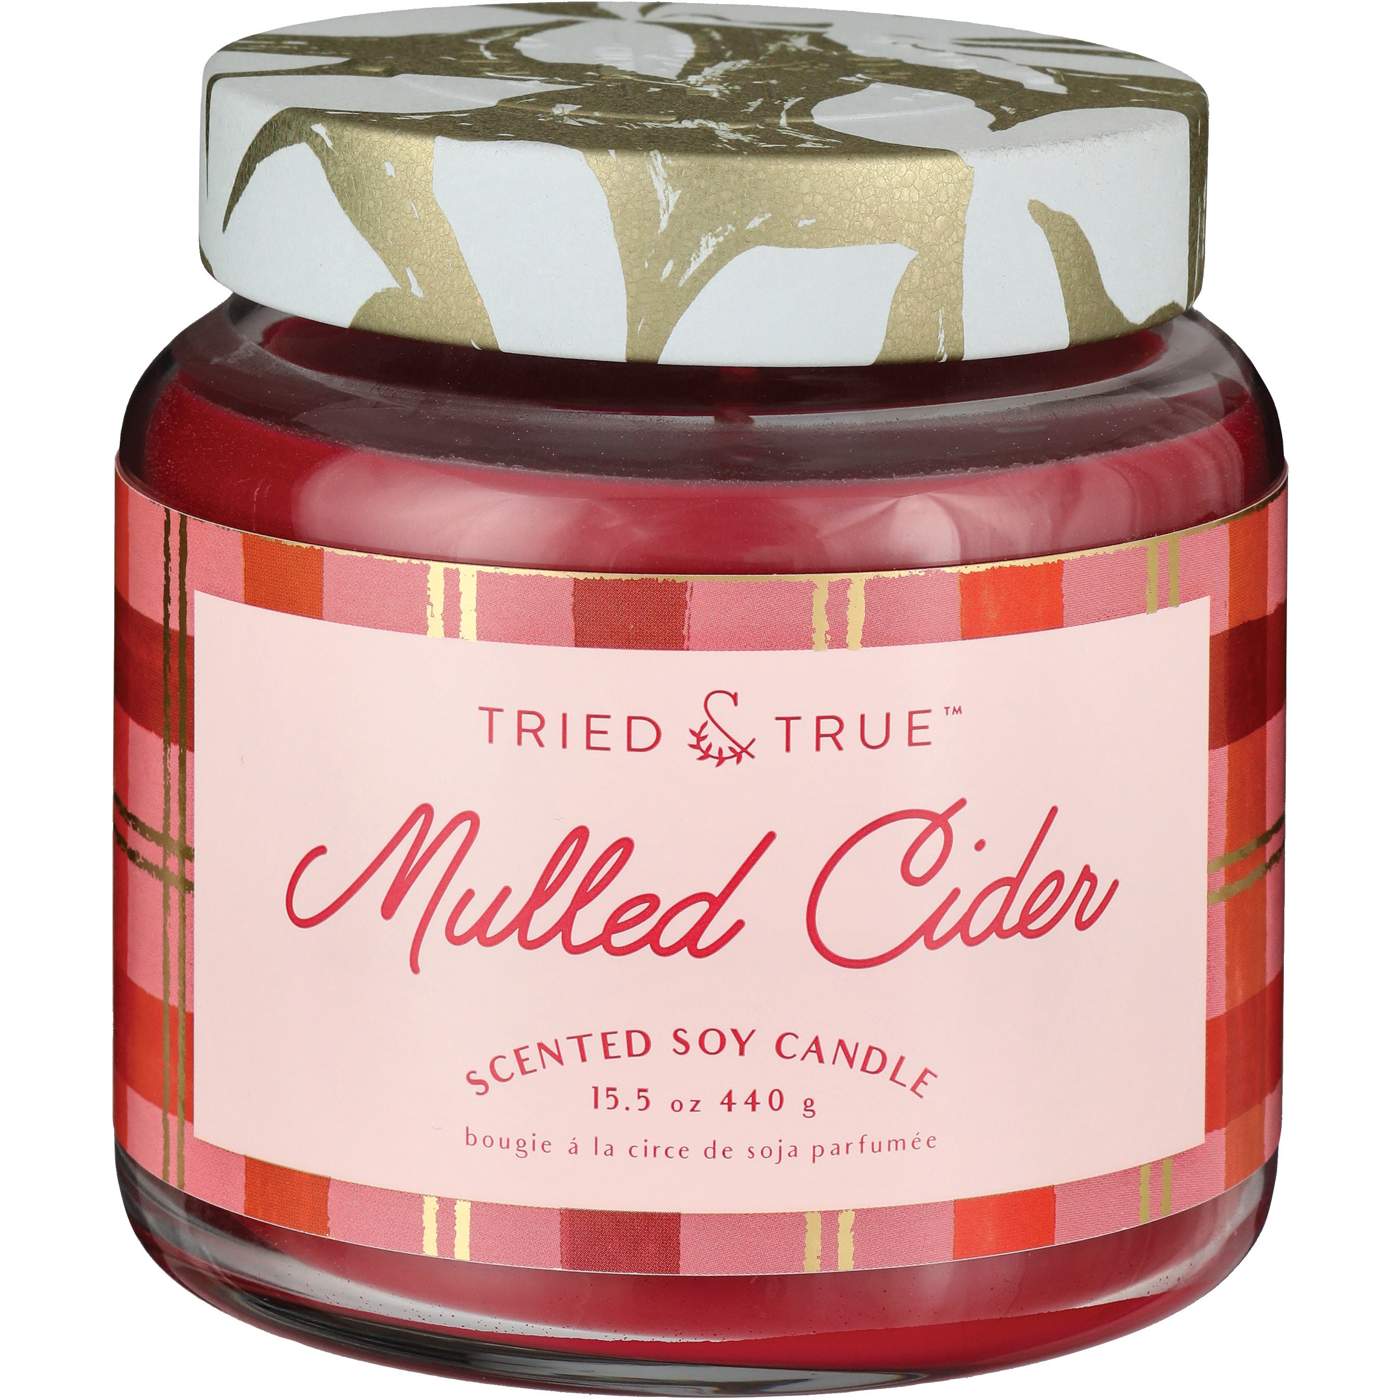 Tried & True Mulled Cider Scented Soy Candle; image 1 of 3